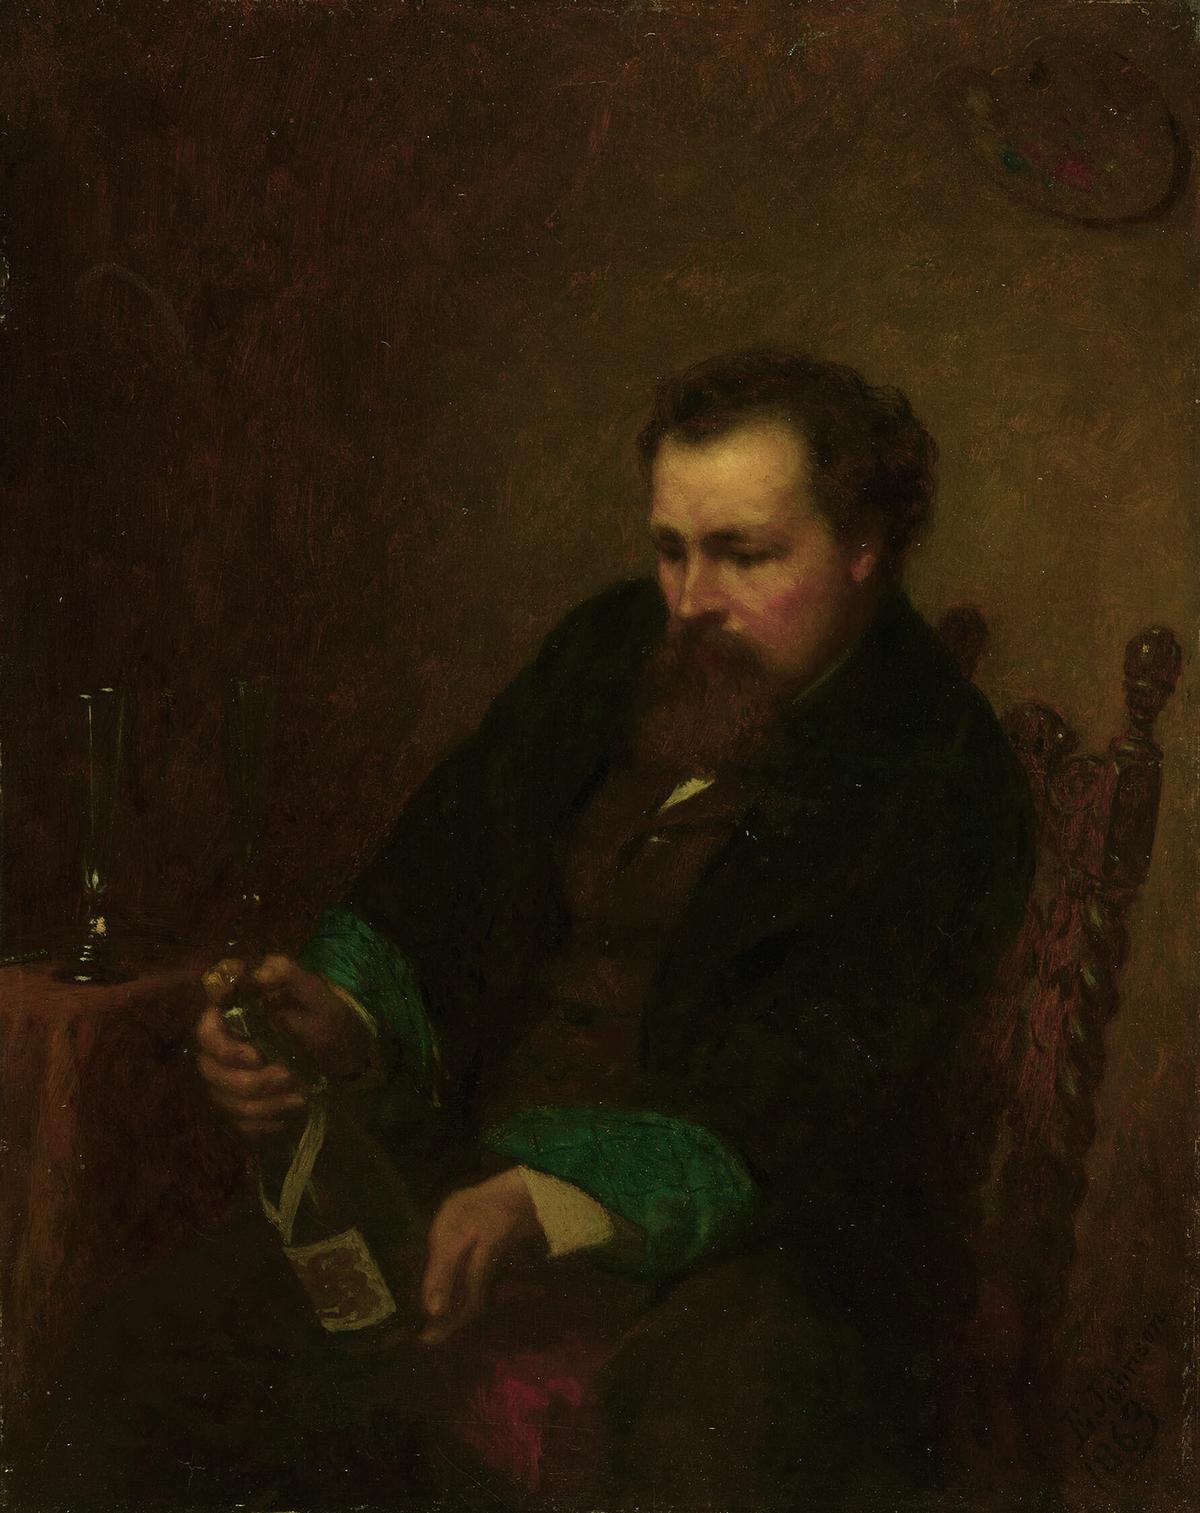 "Self-Portrait," 1863, by Eastman Johnson. Oil on millboard; 15 1/2 inches by 12 inches. The Art Institute of Chicago. (Public Domain)